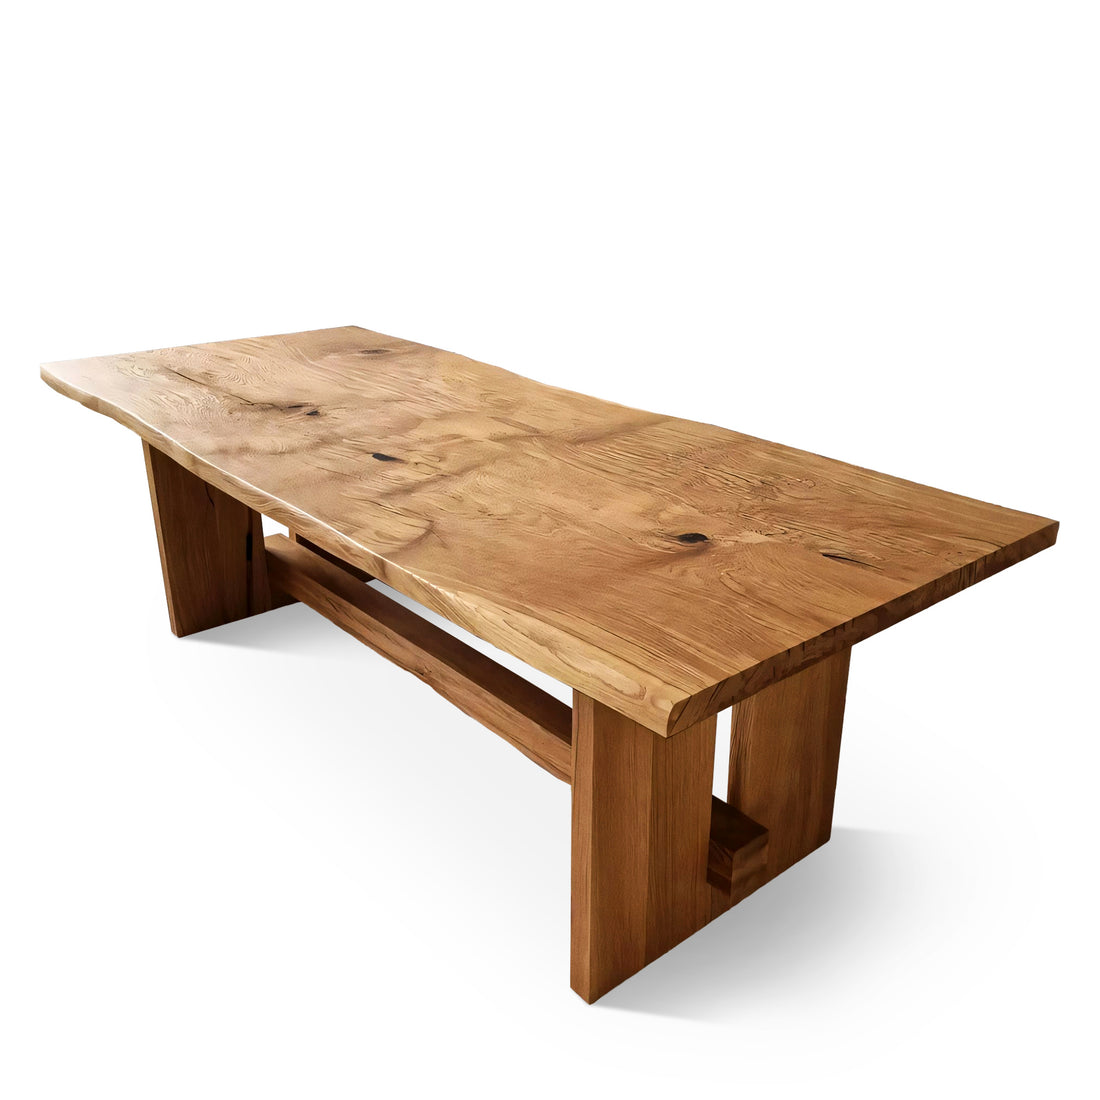 Rustic Extendable Oak Dining Table S10home